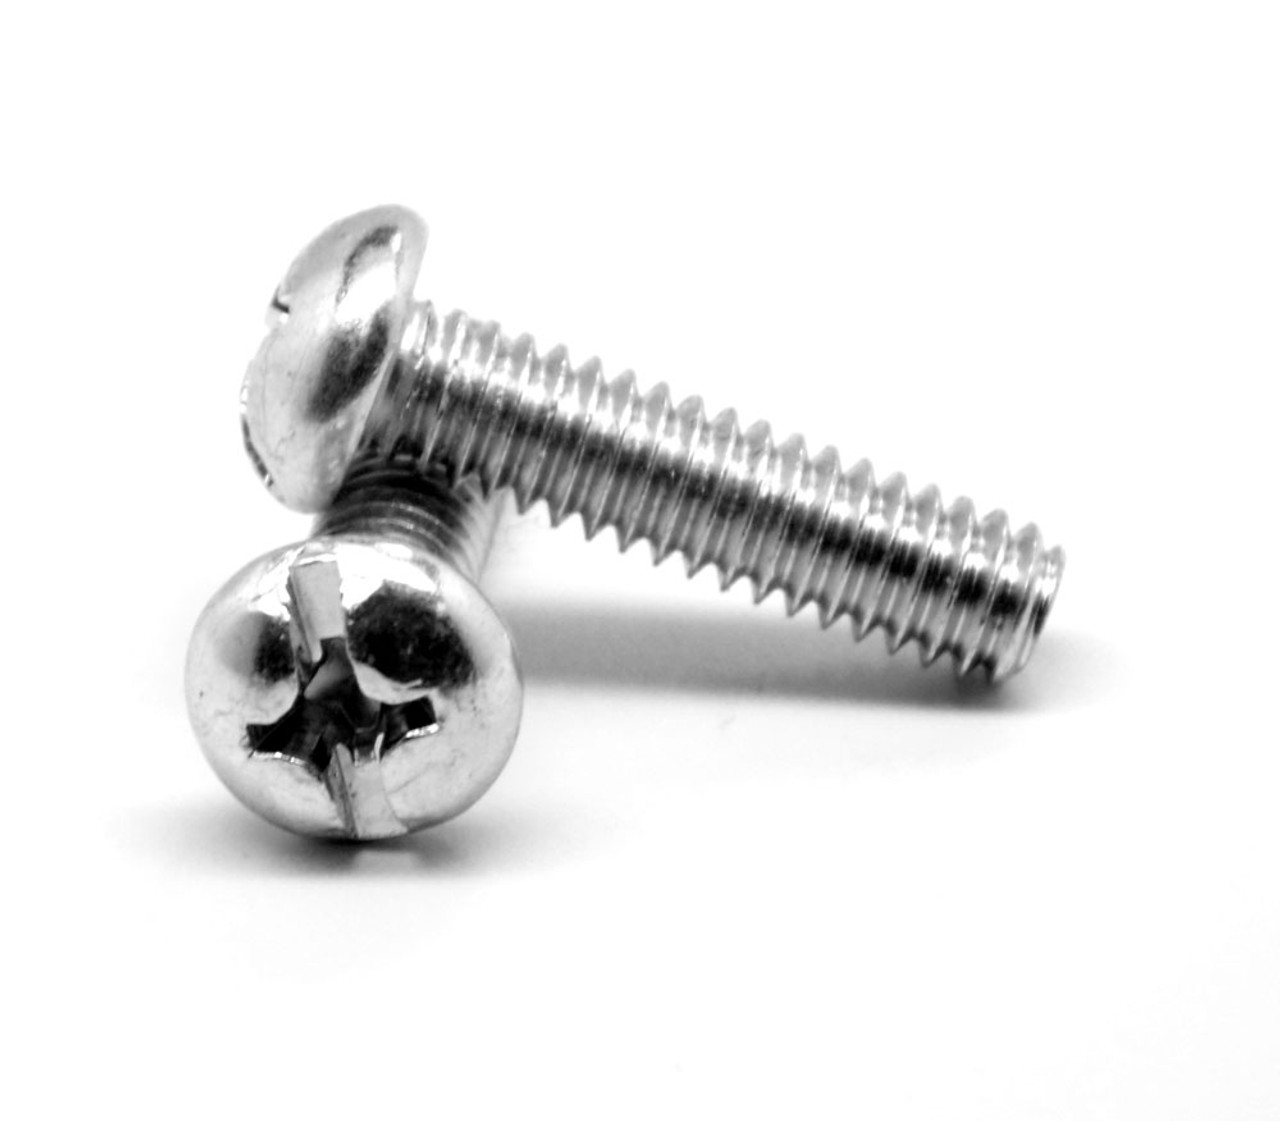 #10-32 x 1 1/4" (FT) Fine Thread Machine Screw Combo (Phillips/Slotted) Round Head Low Carbon Steel Zinc Plated